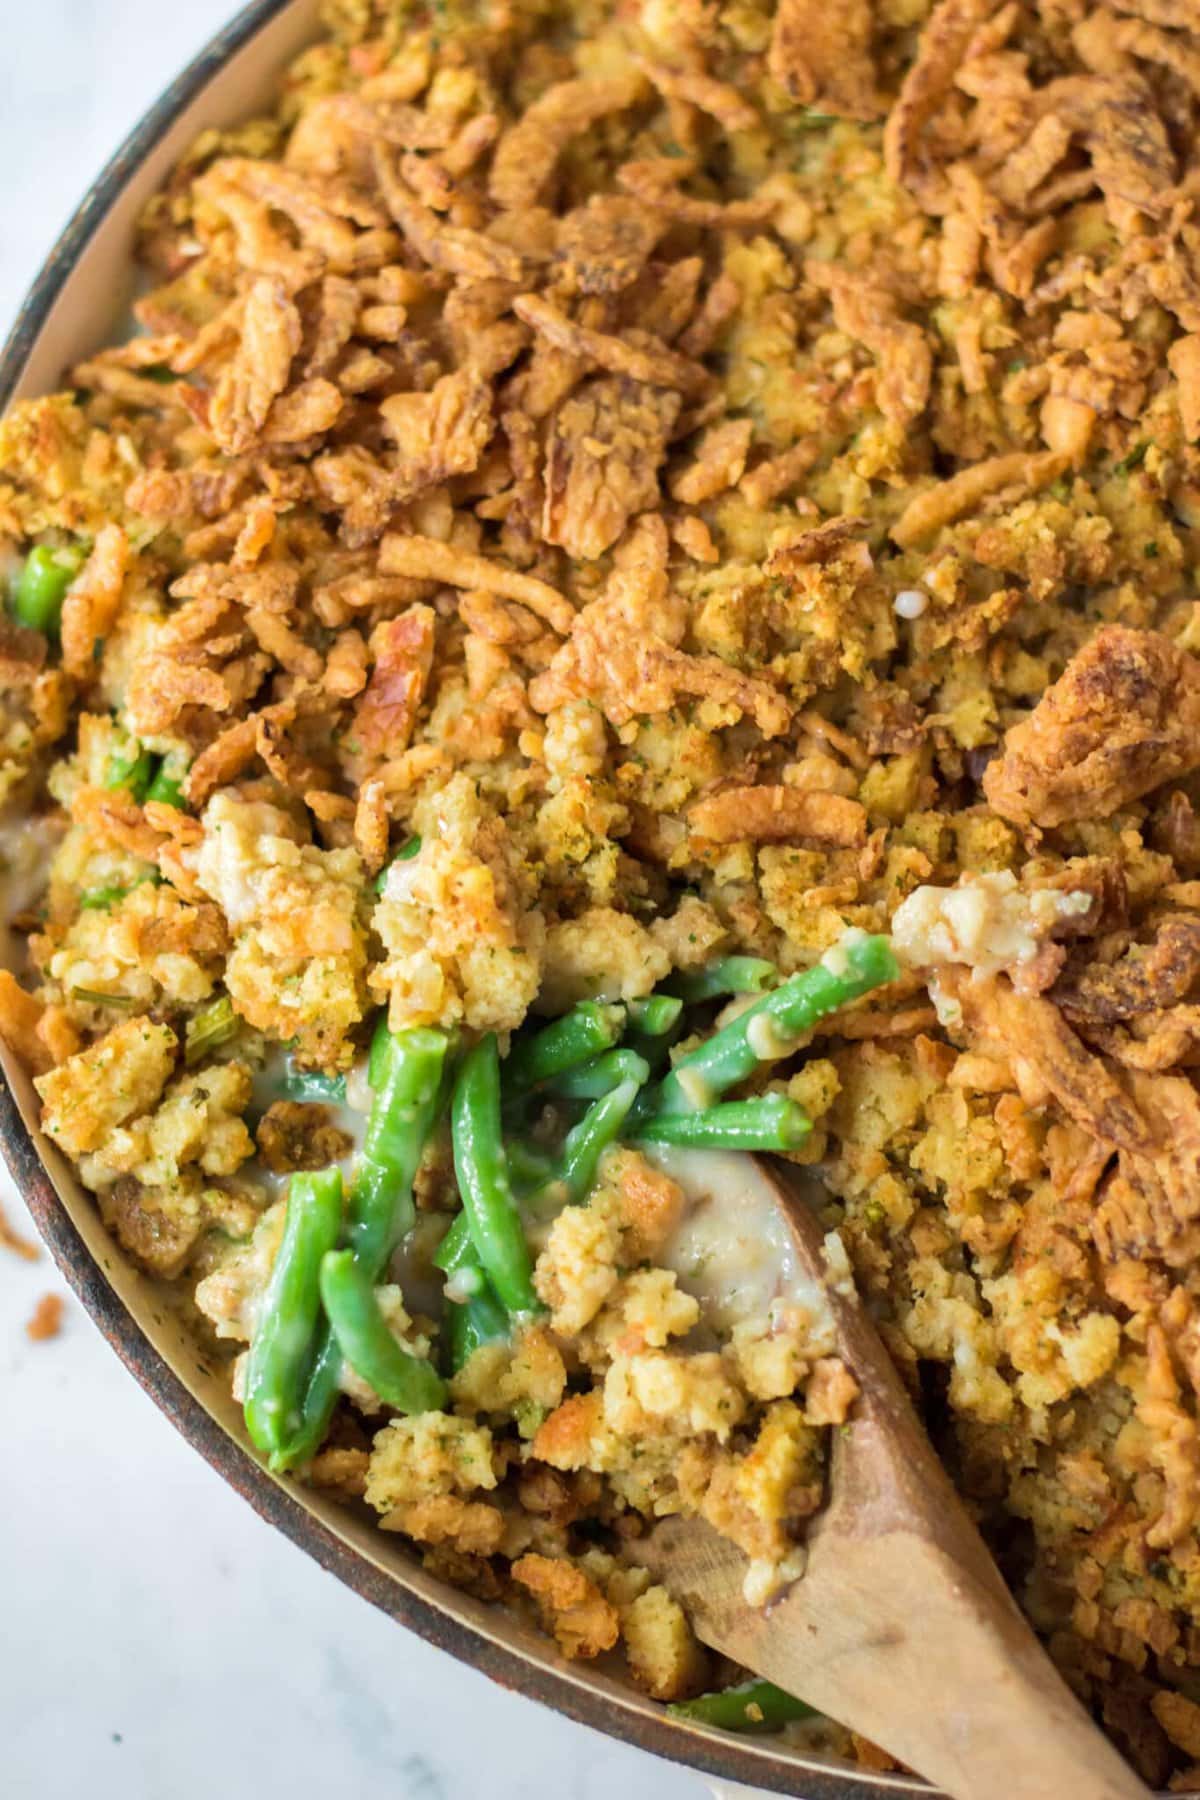 A spoon lifting up the Green Bean Stuffing.